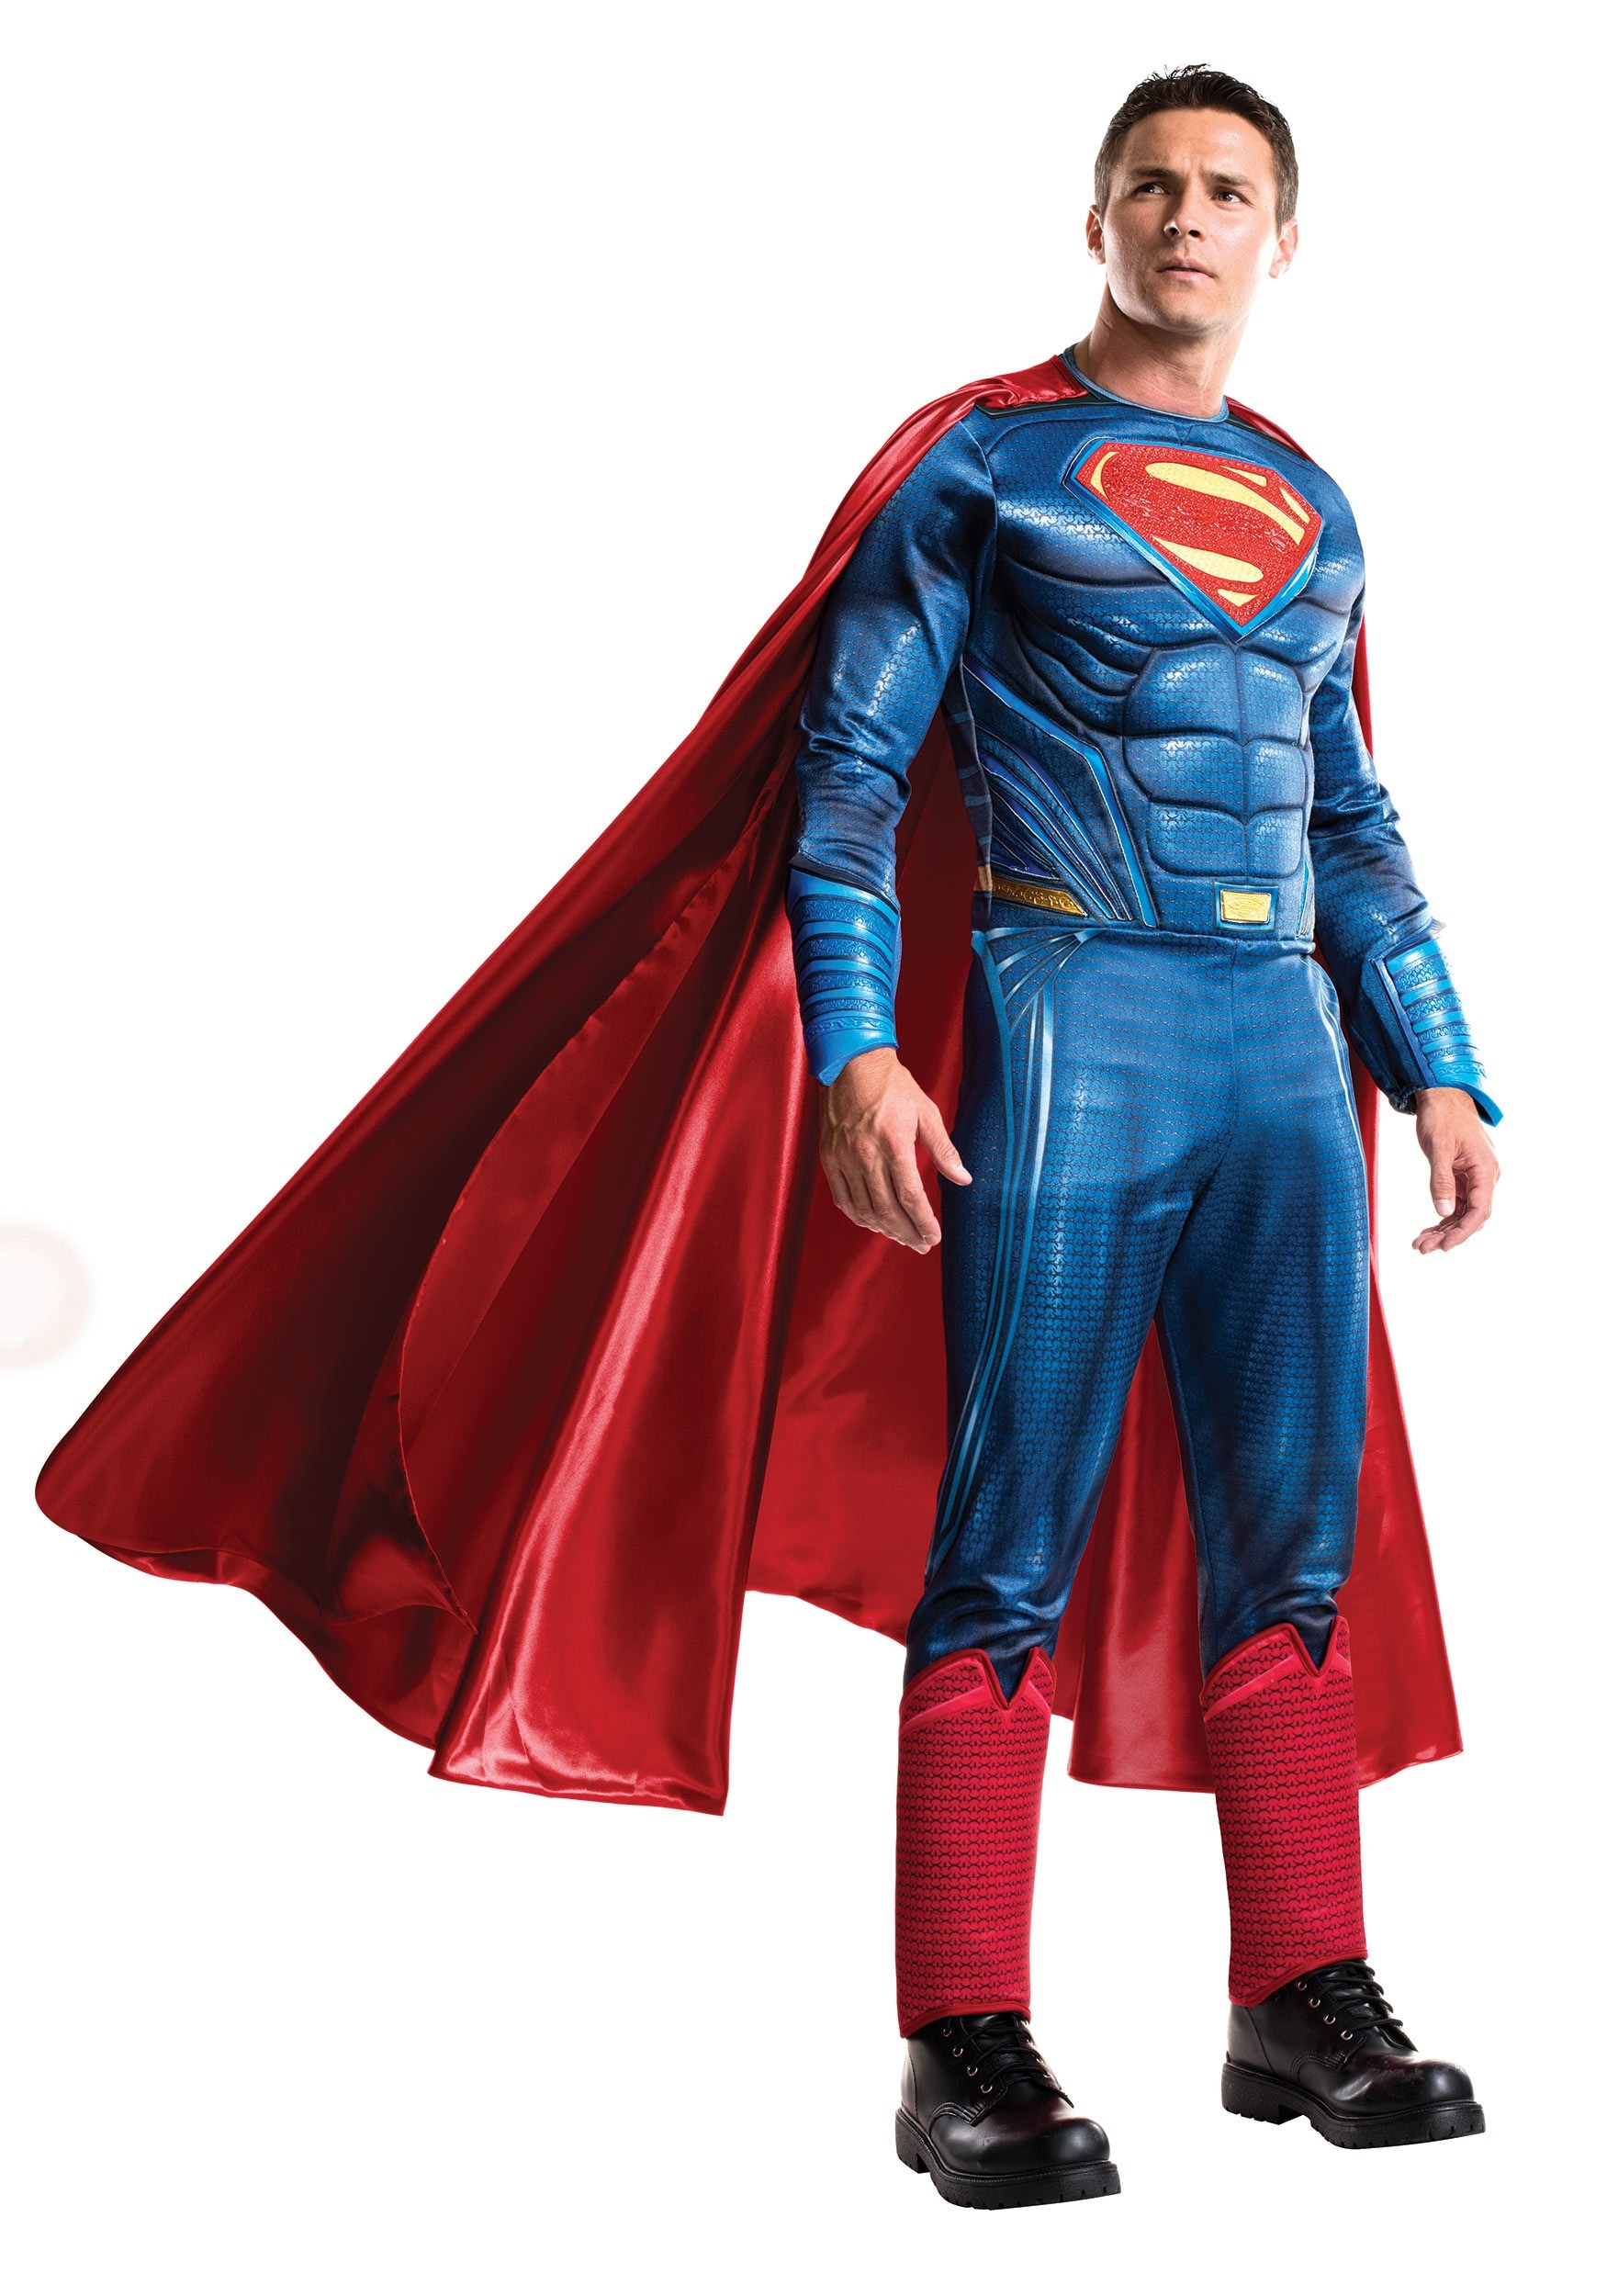 4.) Men's High Quality Dawn of Justice Superman Costume